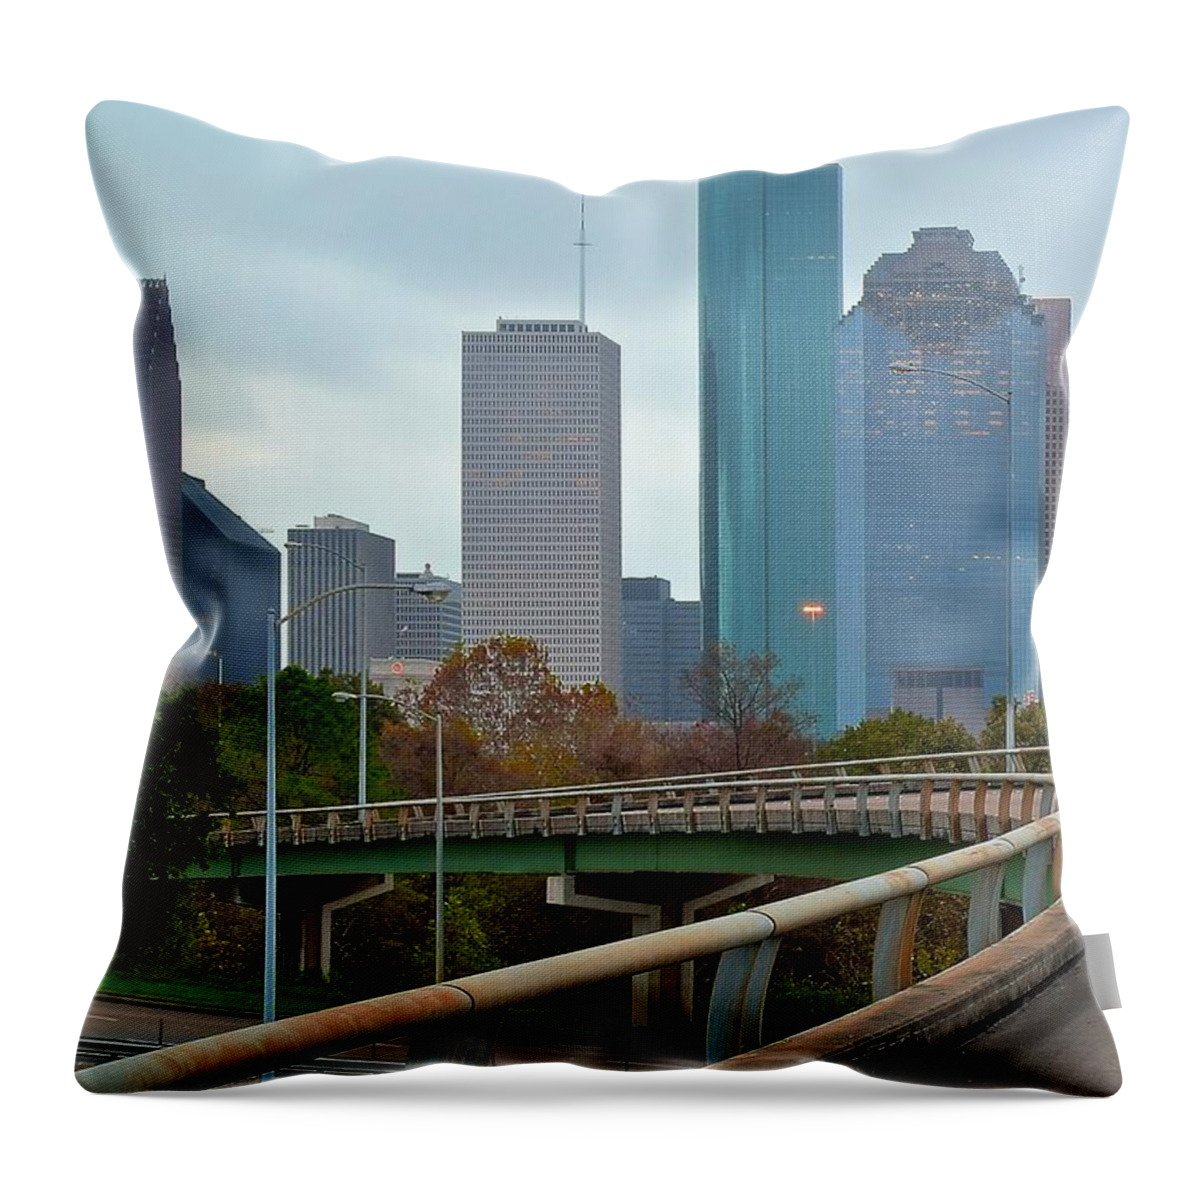 Houston Throw Pillow featuring the photograph Entering Houston by Frozen in Time Fine Art Photography